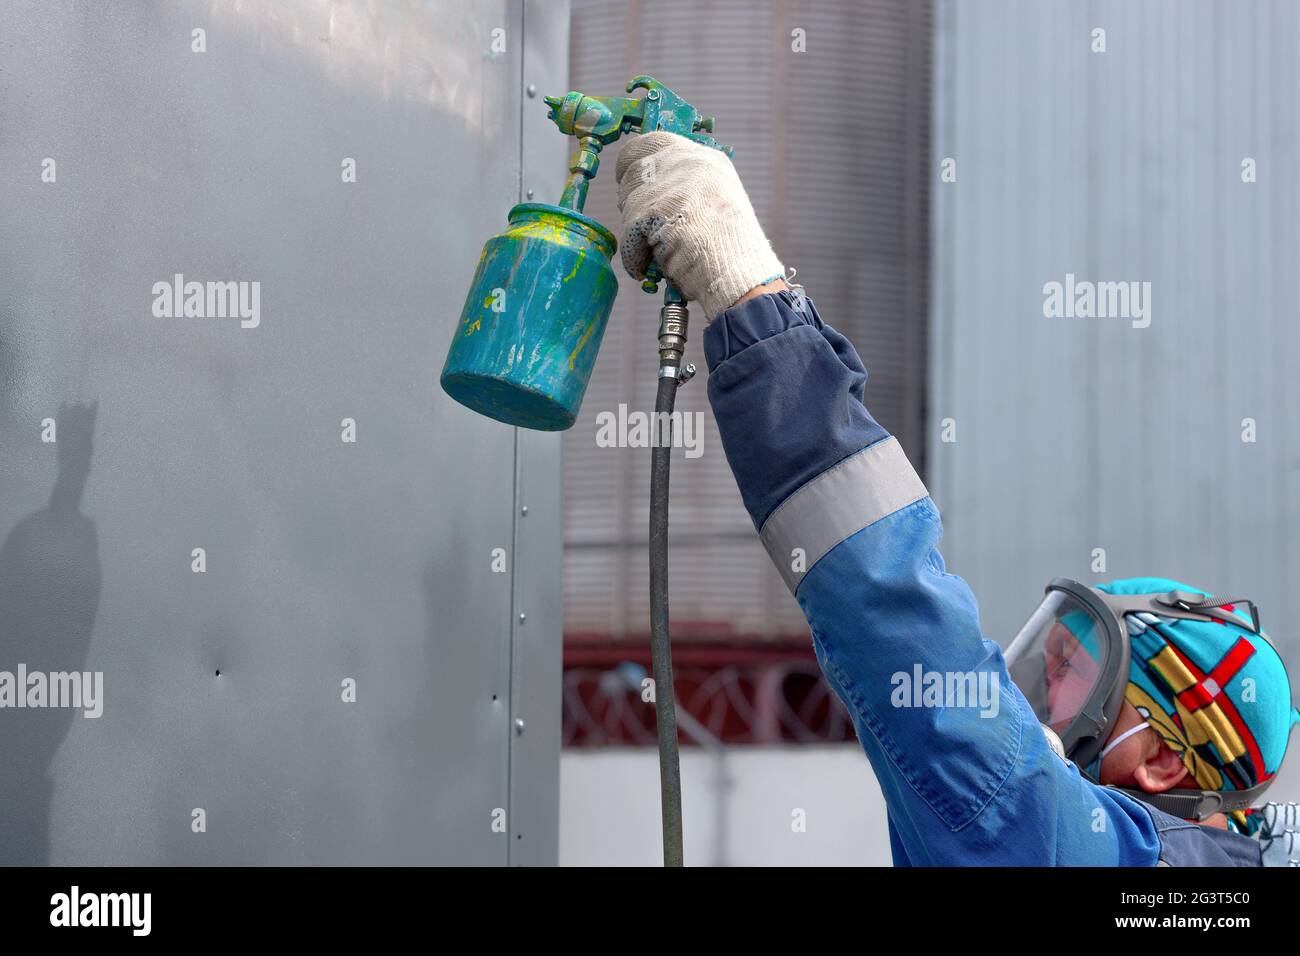 Industrial work. Priming of metal products from the compressor gun. A worker in overalls and a respi Stock Photo